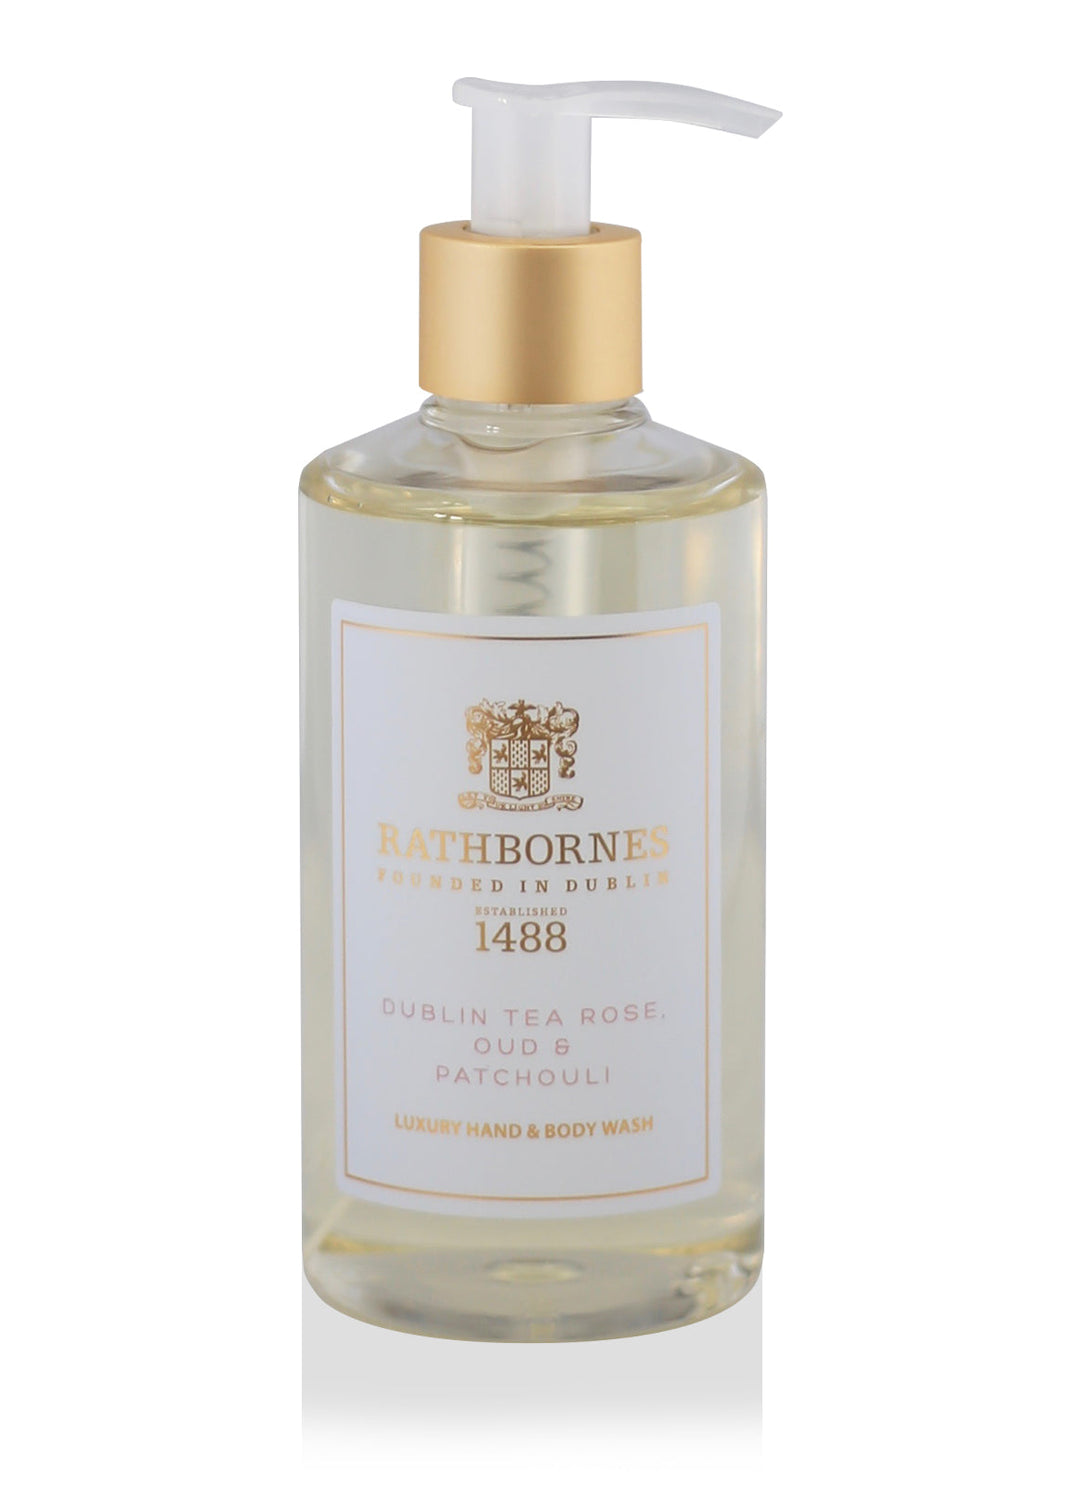 Dublin Tea Rose, Oud & Patchouli Luxury Hand and Body Wash